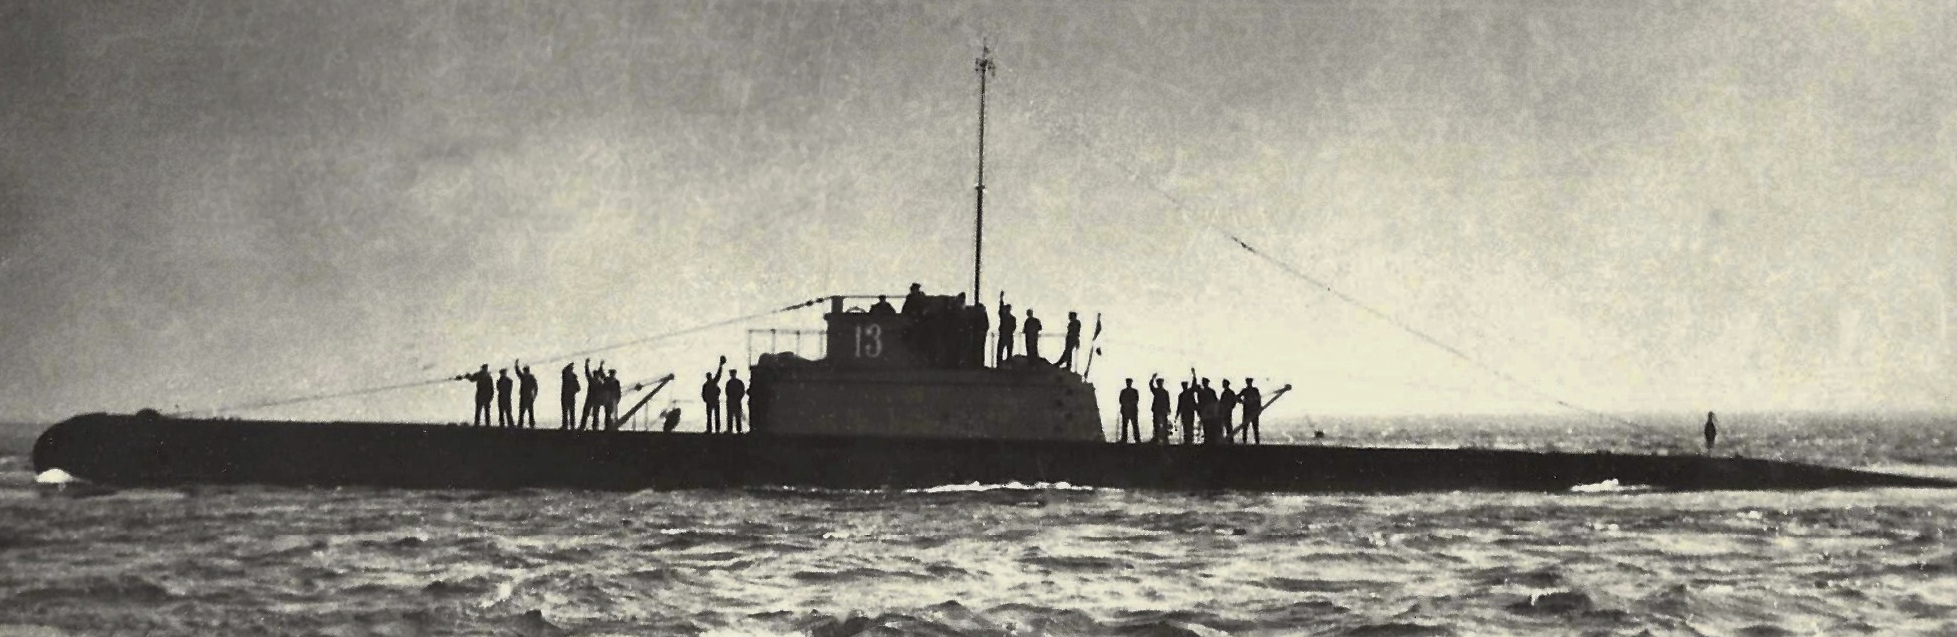 Engels News TV item: Search for answers 80 years after submarine vanished